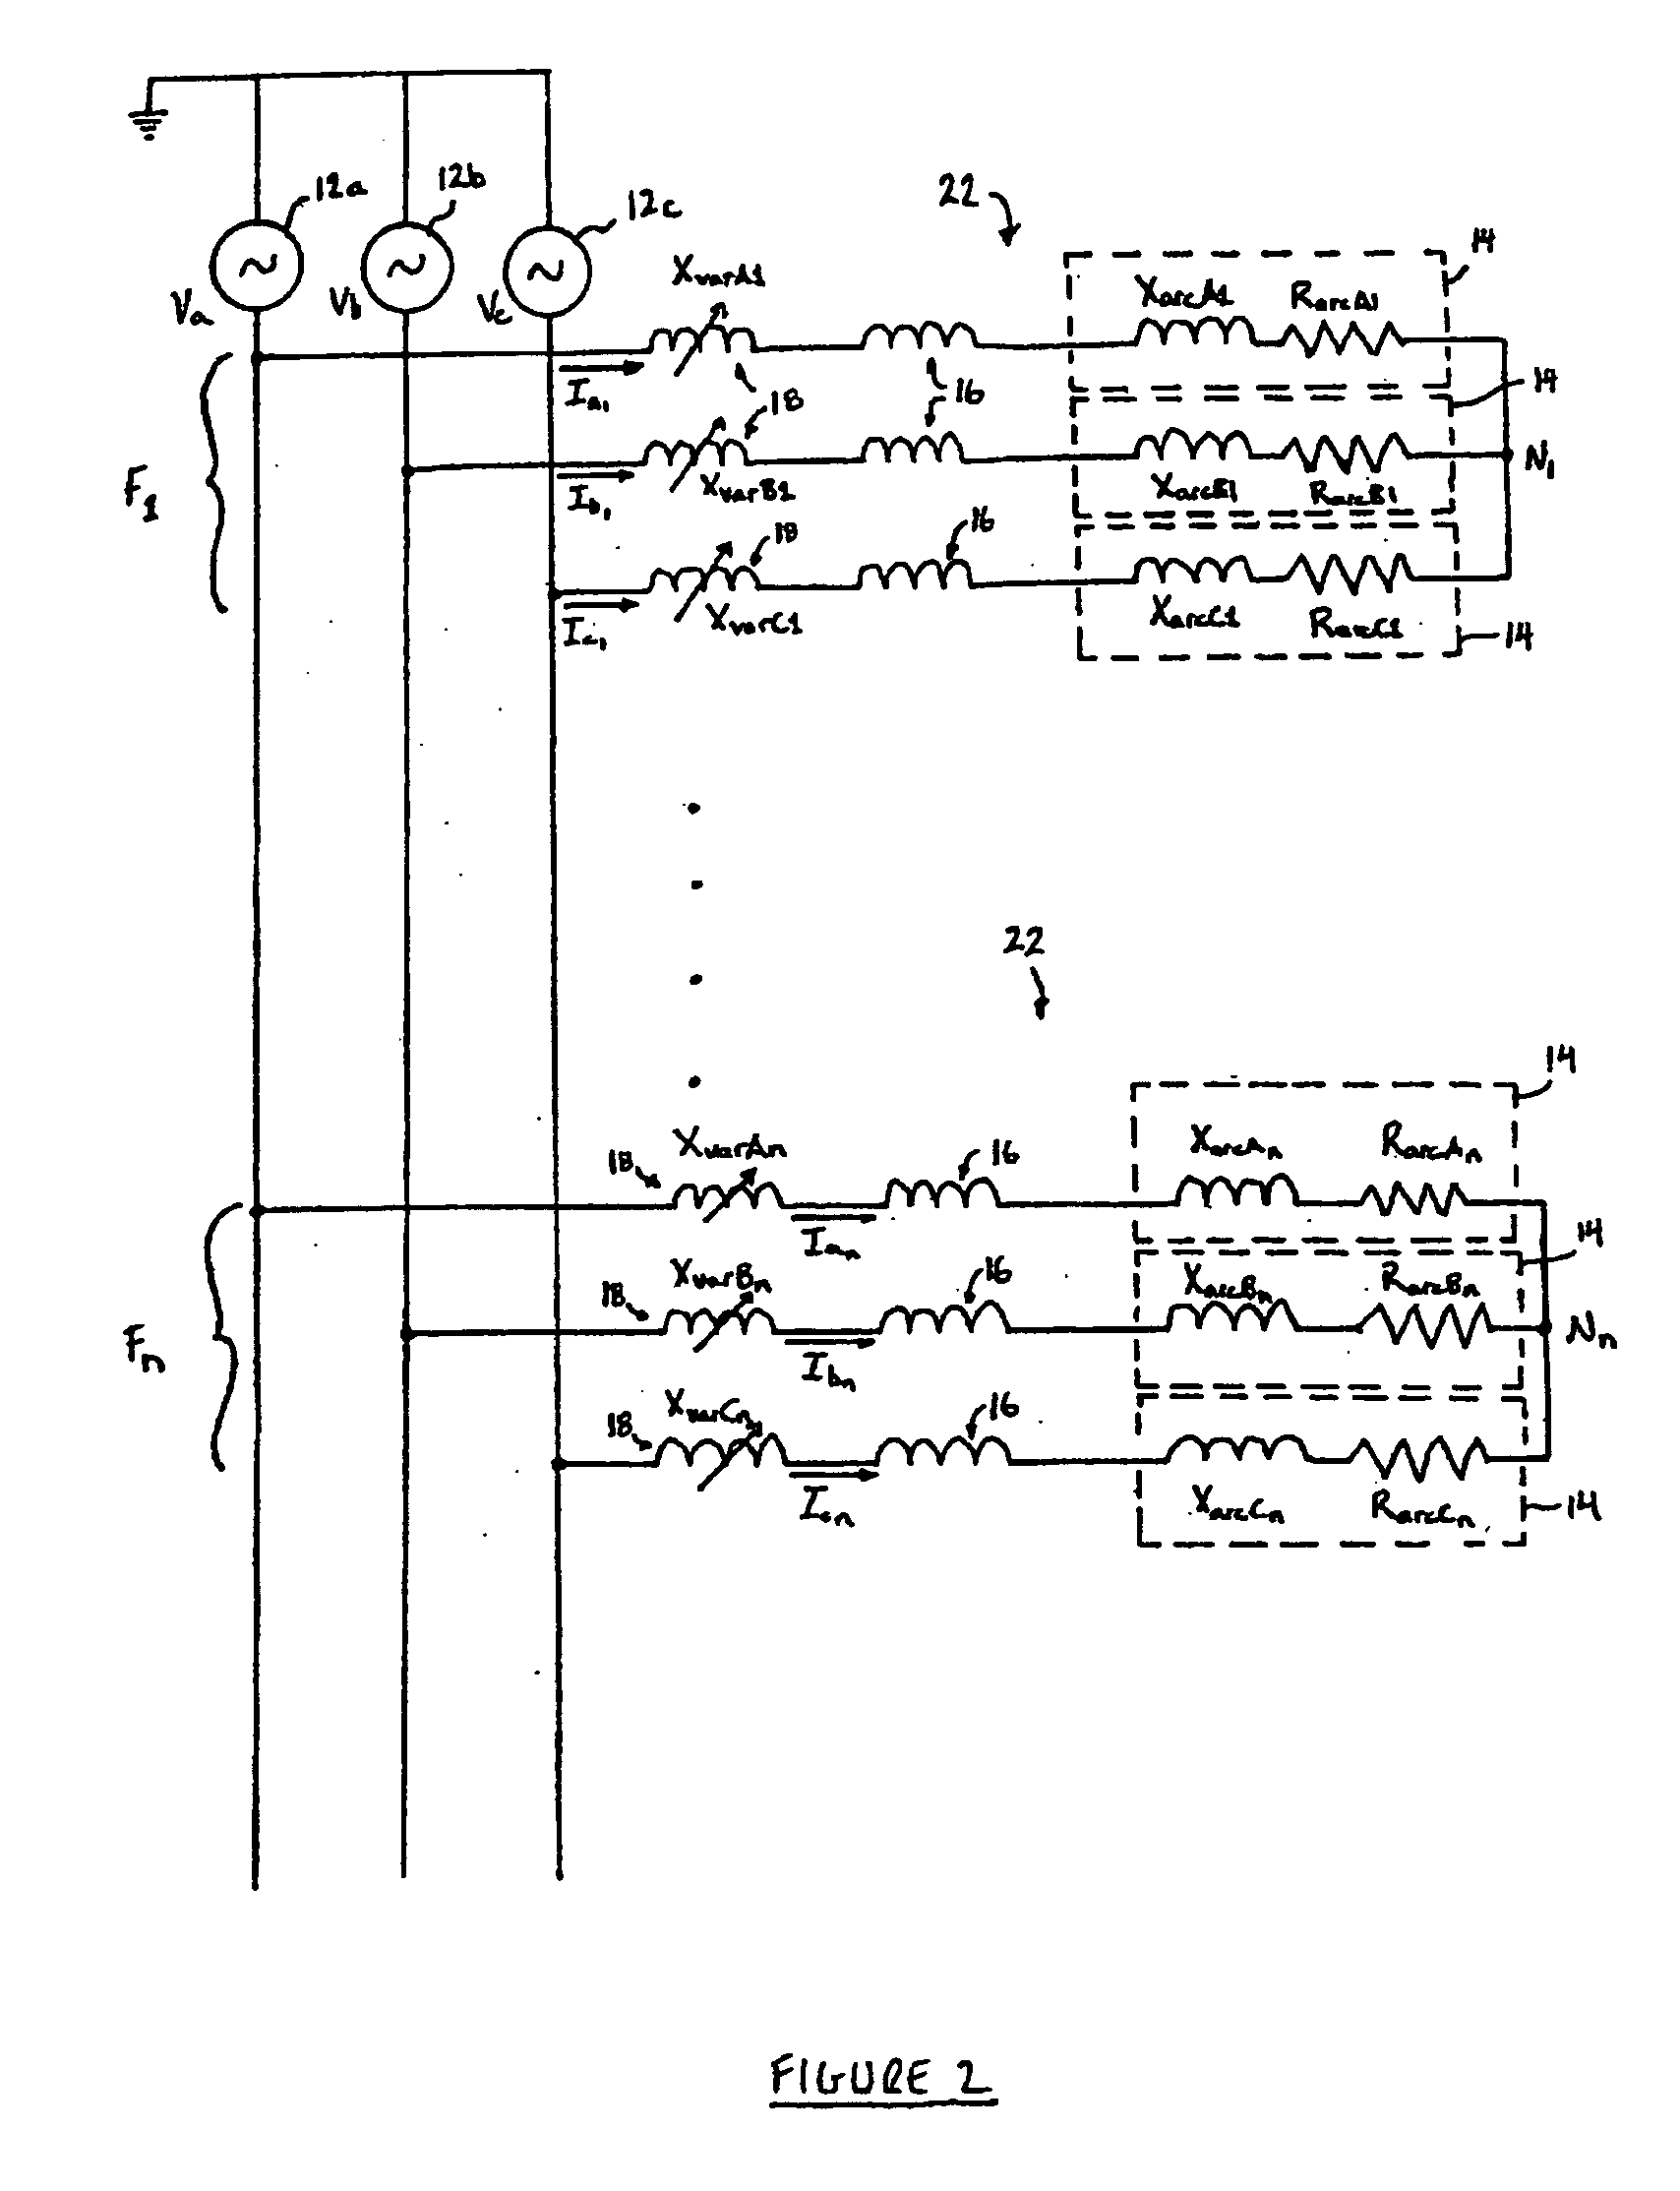 System and method for minimizing loss of electrical conduction during input of feed material to a furnace